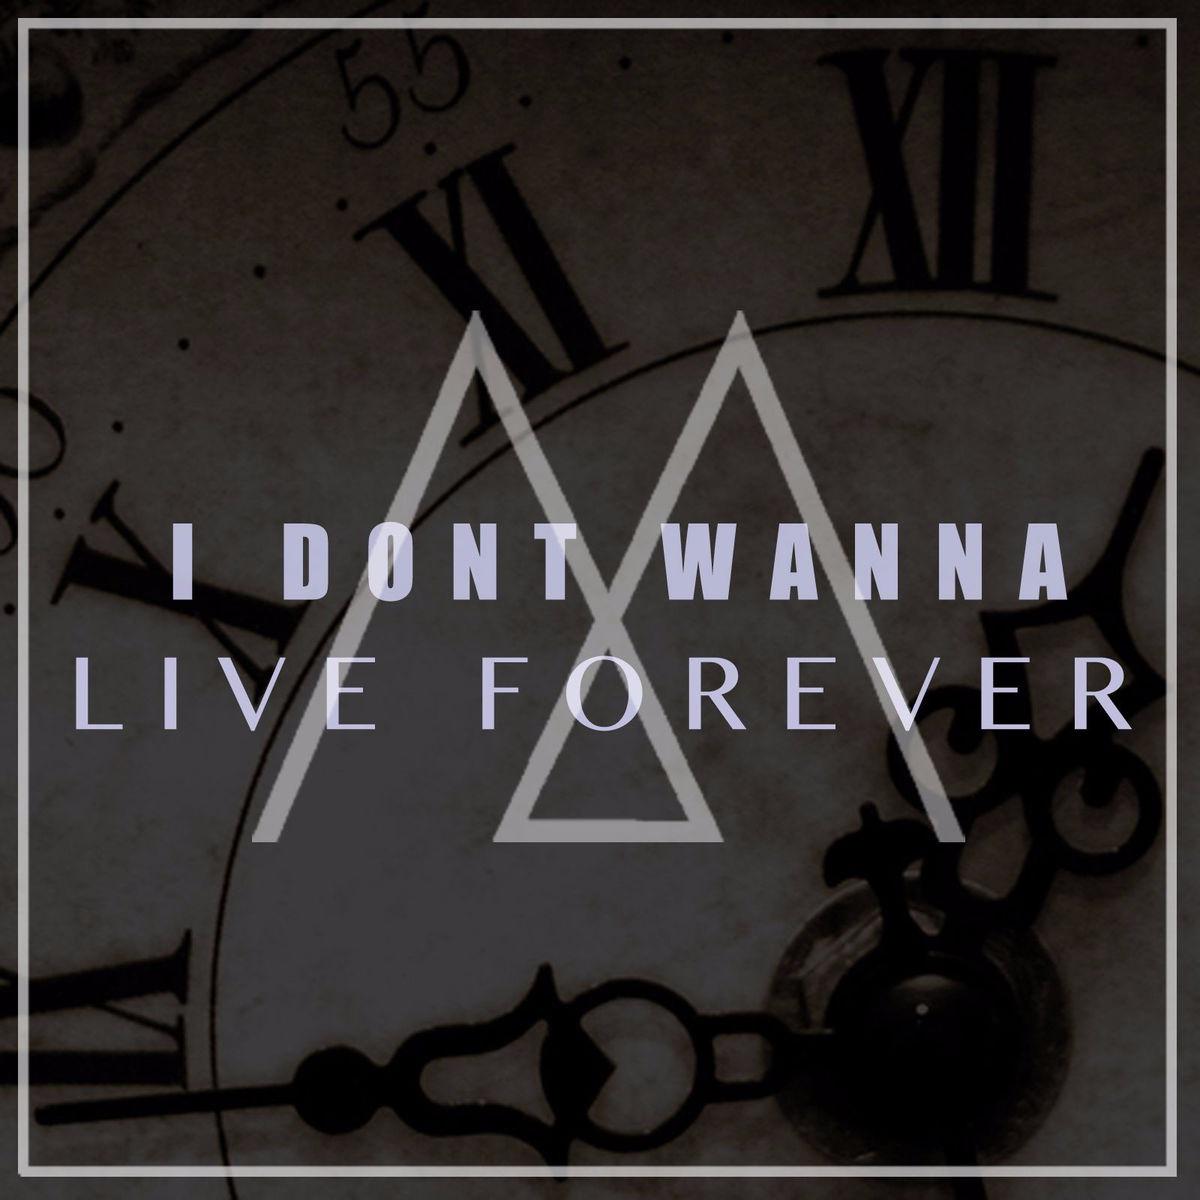 I Don't Wanna Live Forever歌词 歌手MADILYN-专辑I Don't Wanna Live Forever-单曲《I Don't Wanna Live Forever》LRC歌词下载